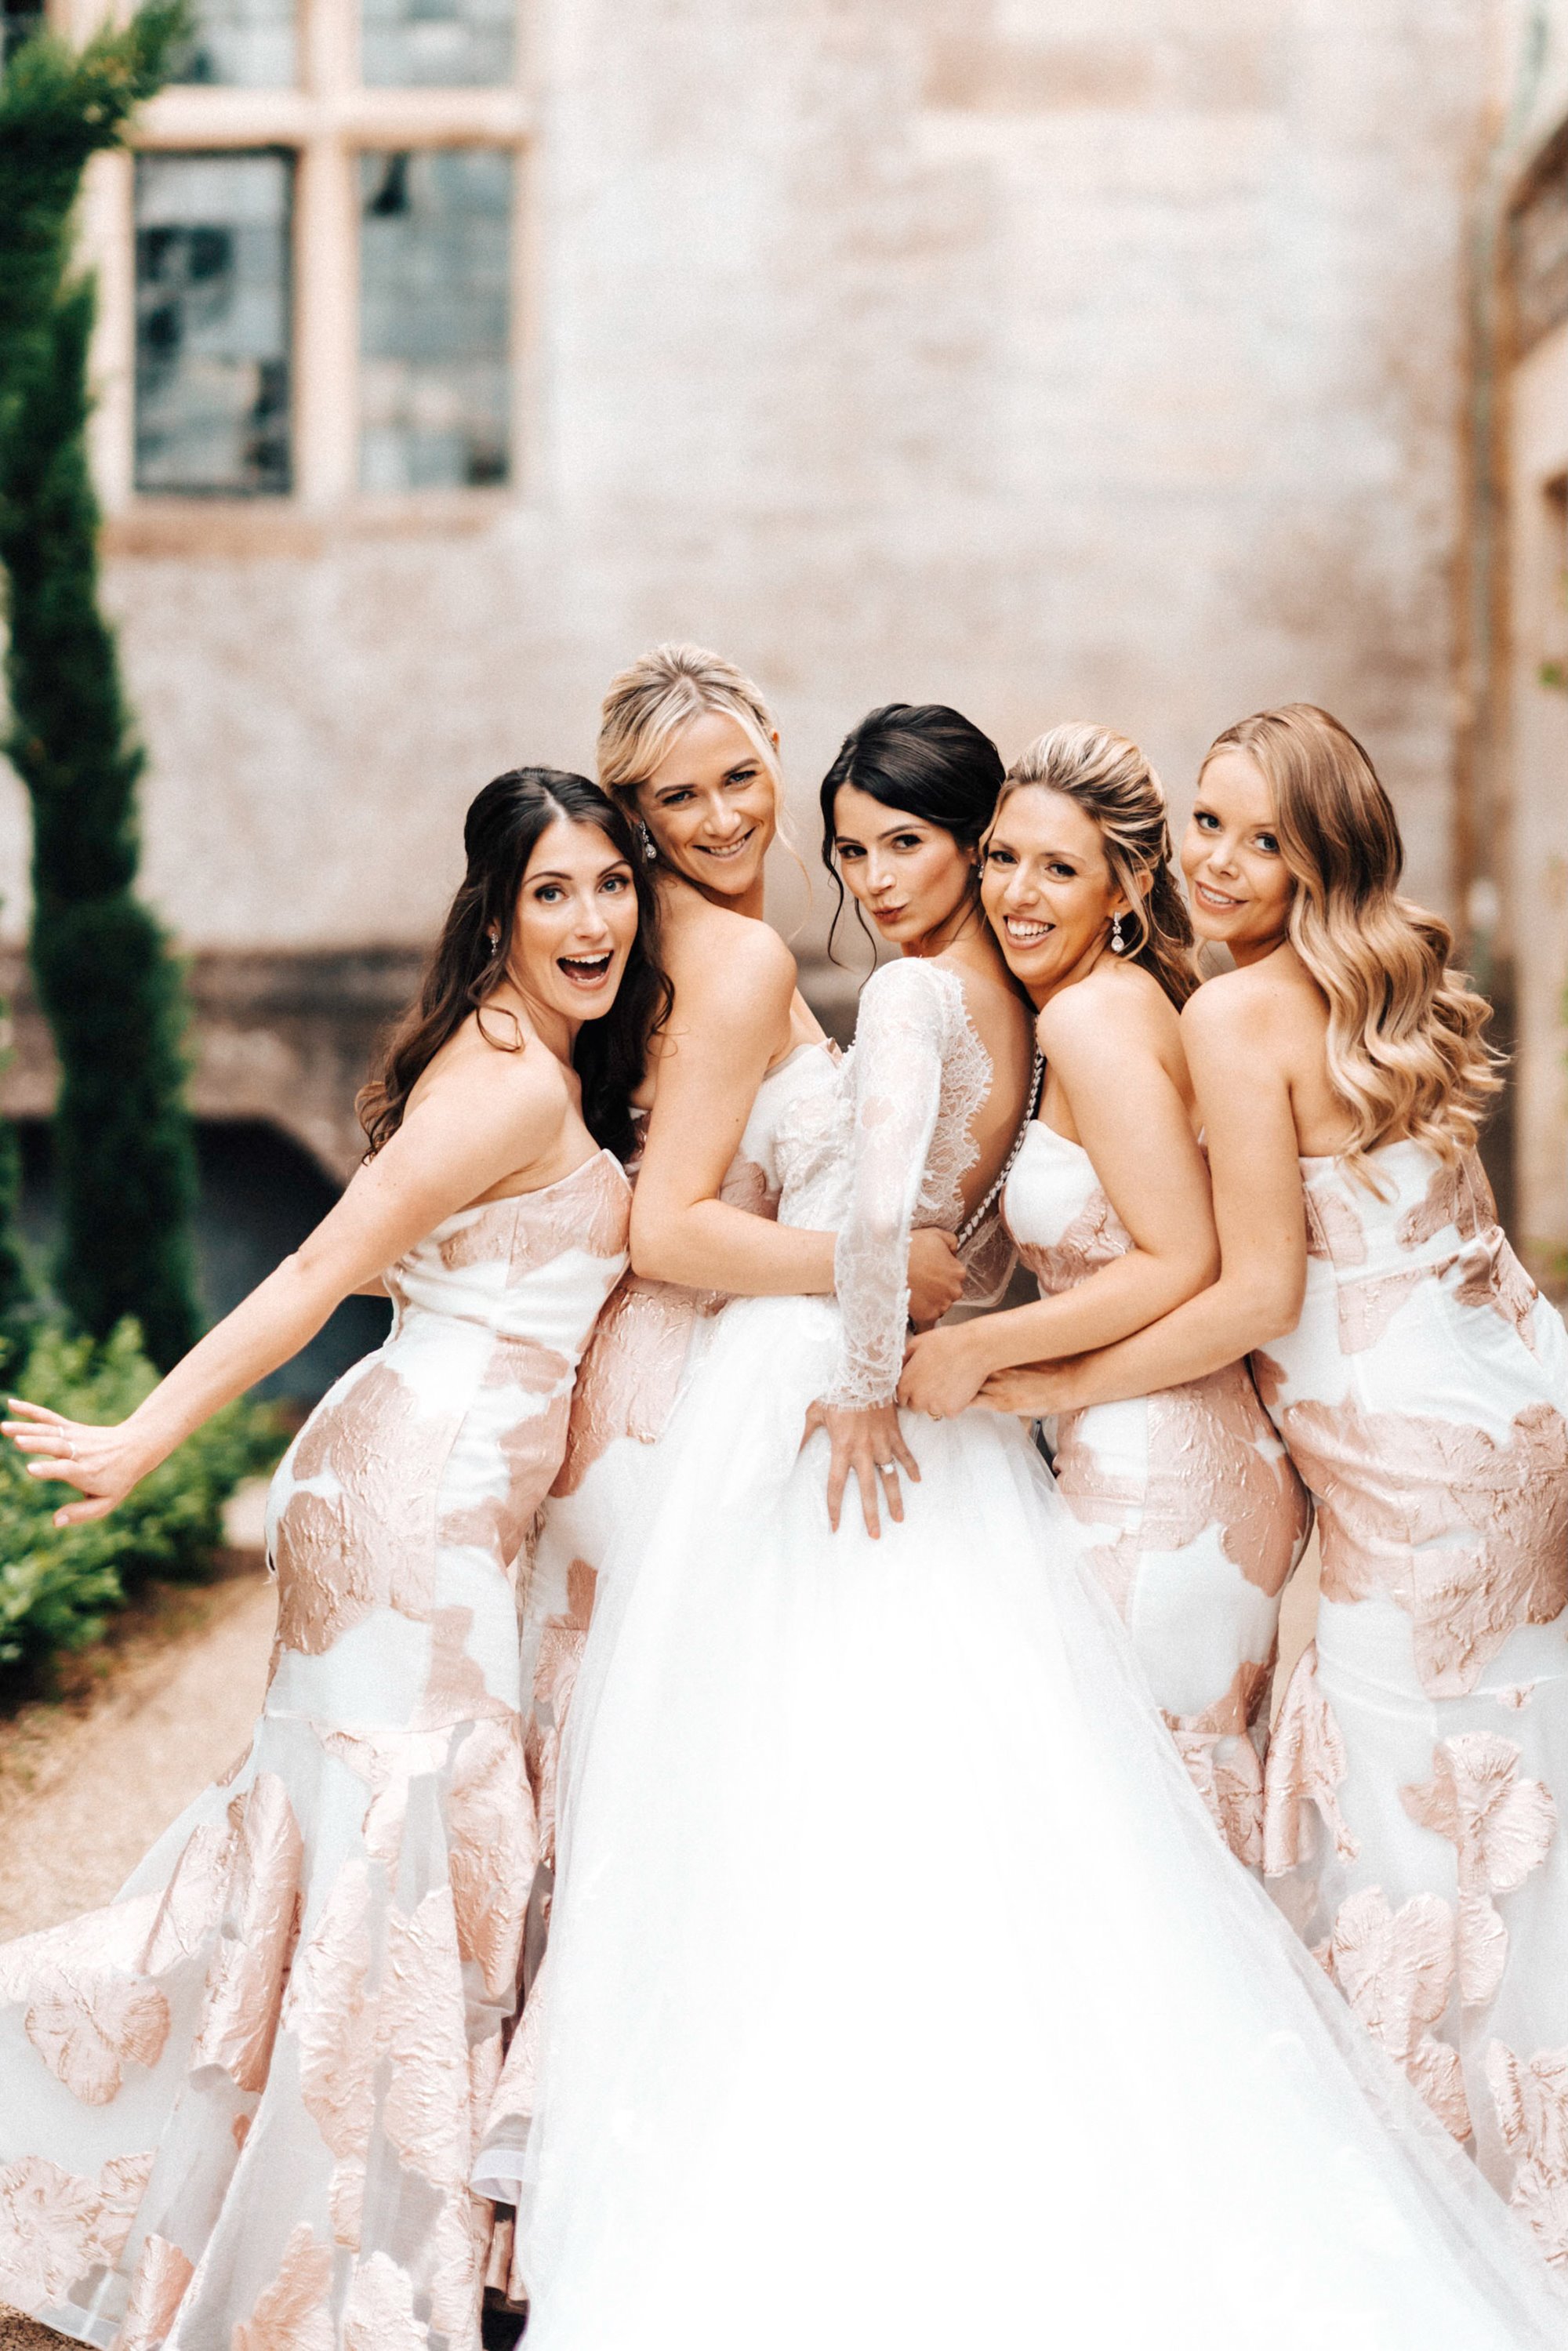 Bride with bridesmaids in pink and white patterned dresses pose outside mansion house wedding venue